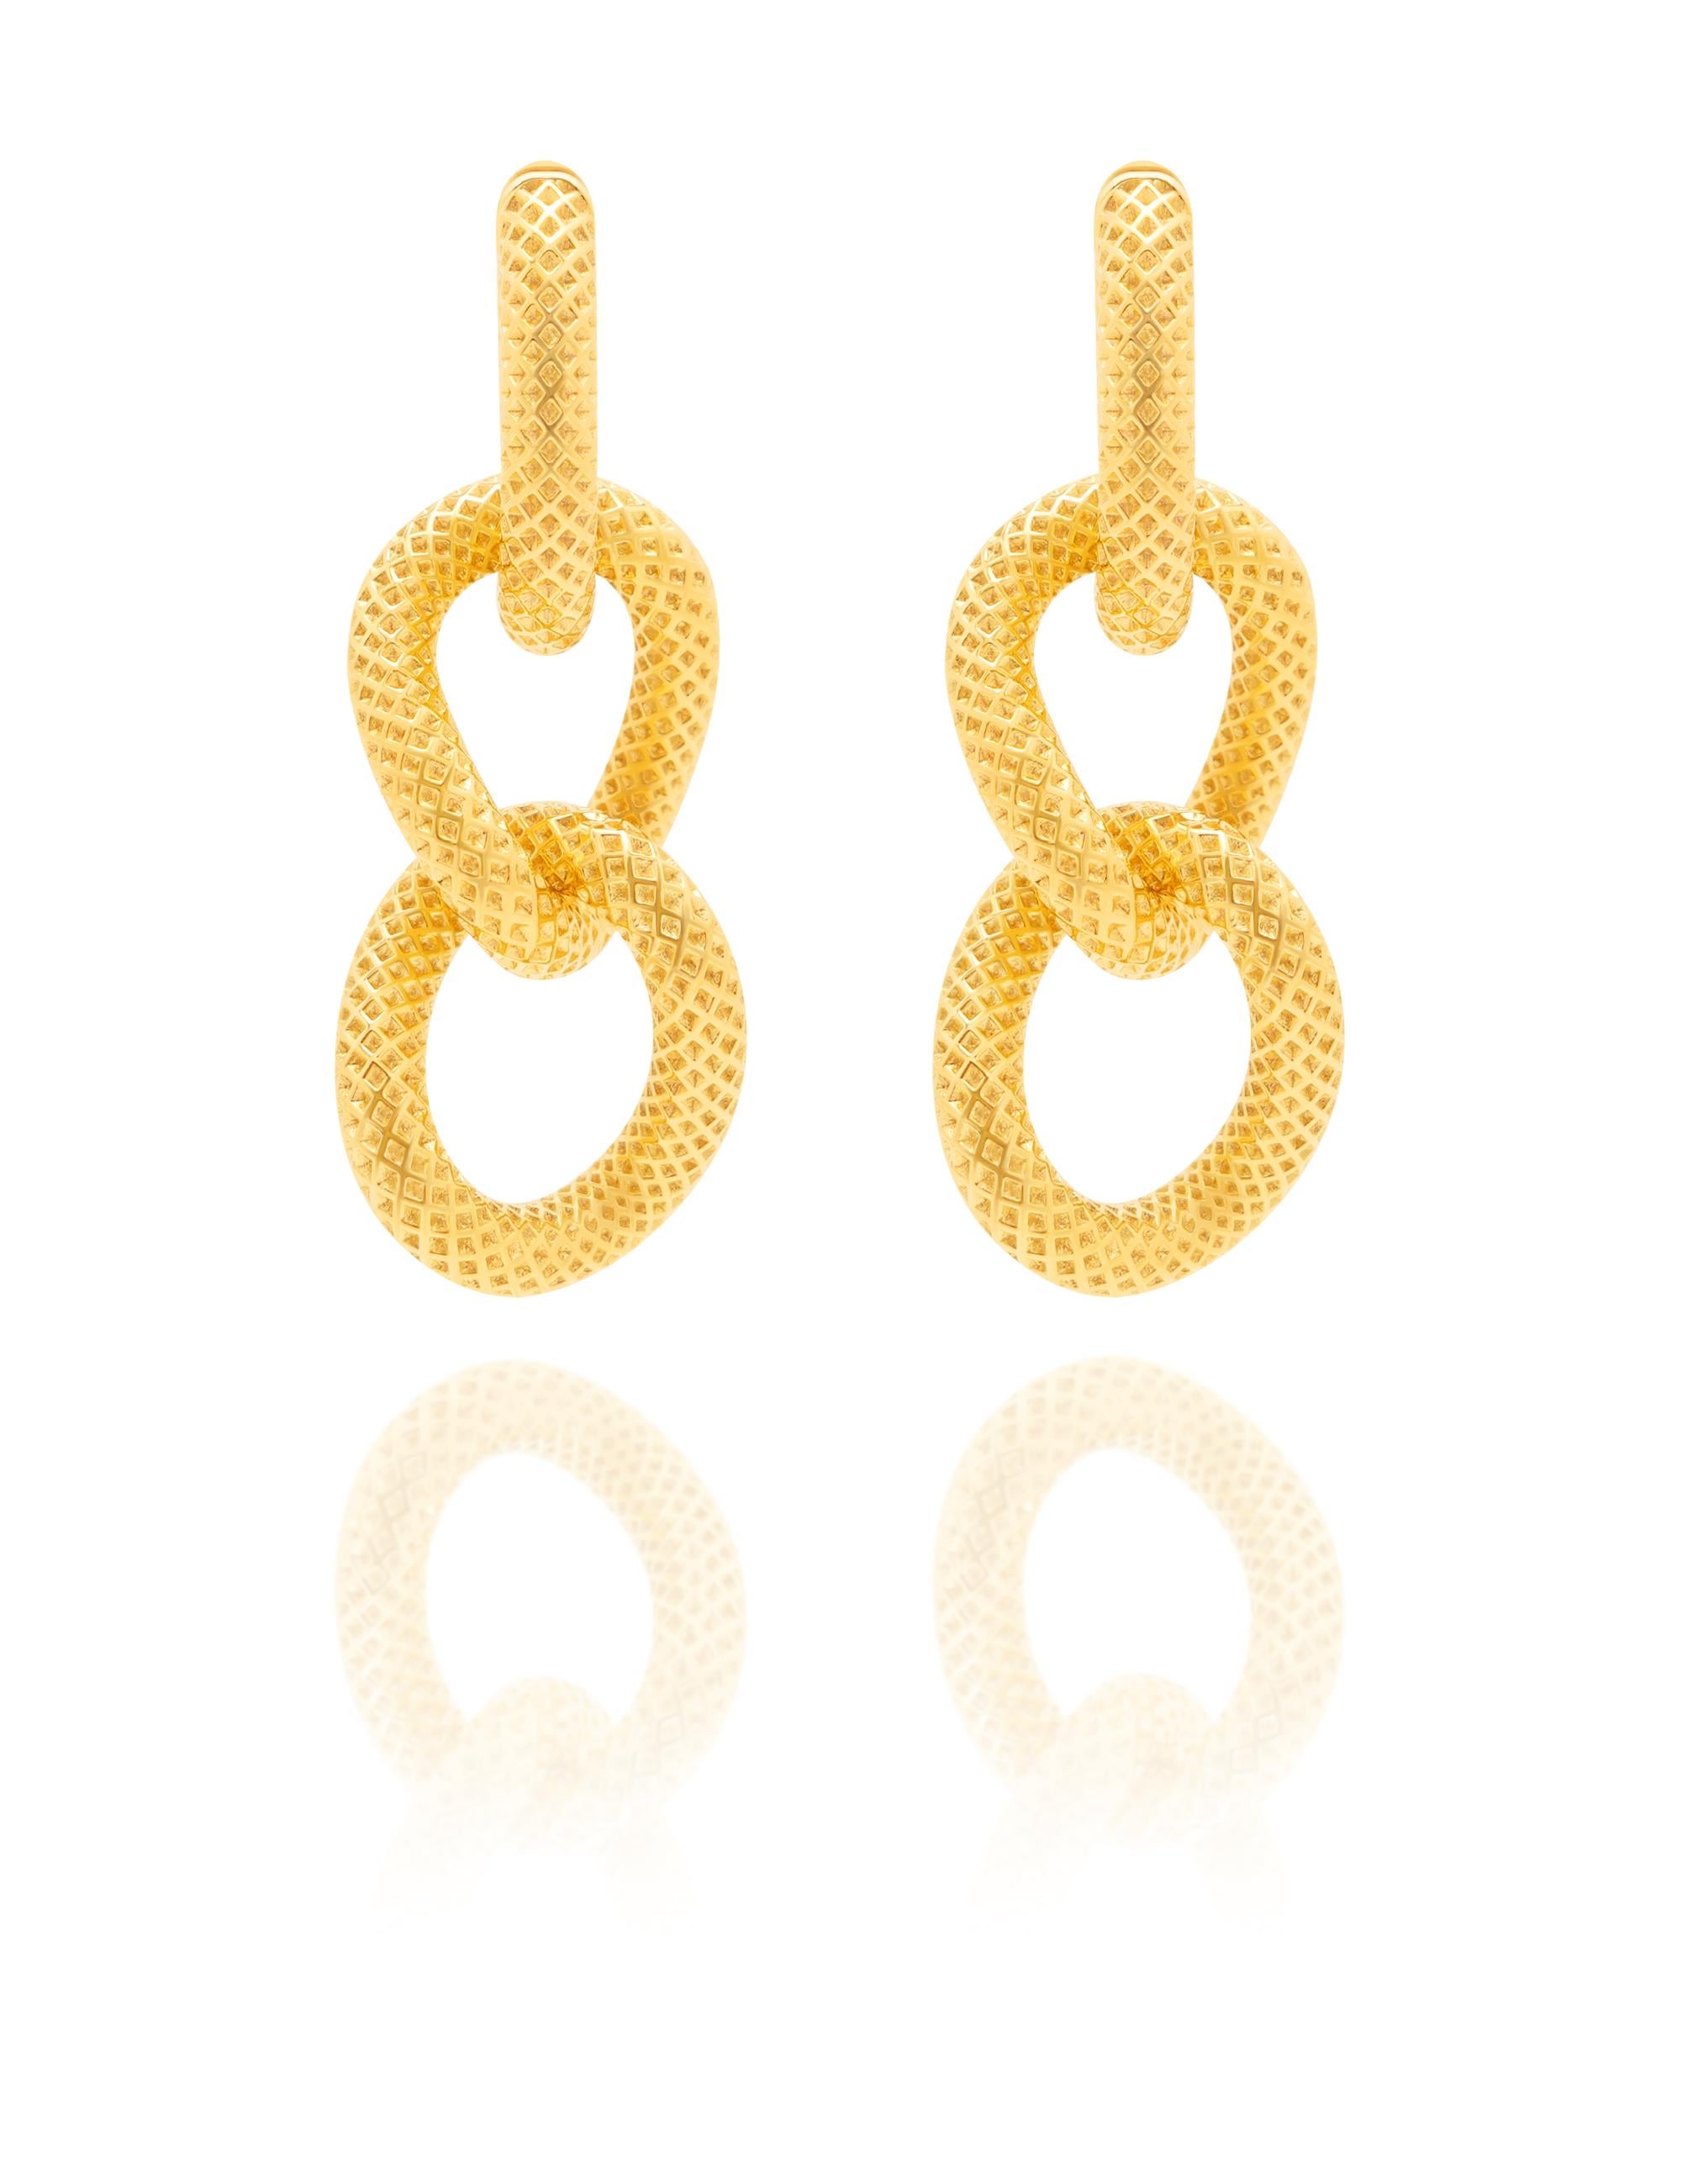 The Eye-Shine Earrings - A Love Affair Collection

The matching earrings to the Eye Shine Necklace is as eye catching as its matching necklace. Inspired by the gold chains of the Eye-Shine necklace, these statement earrings can be worn 3 different